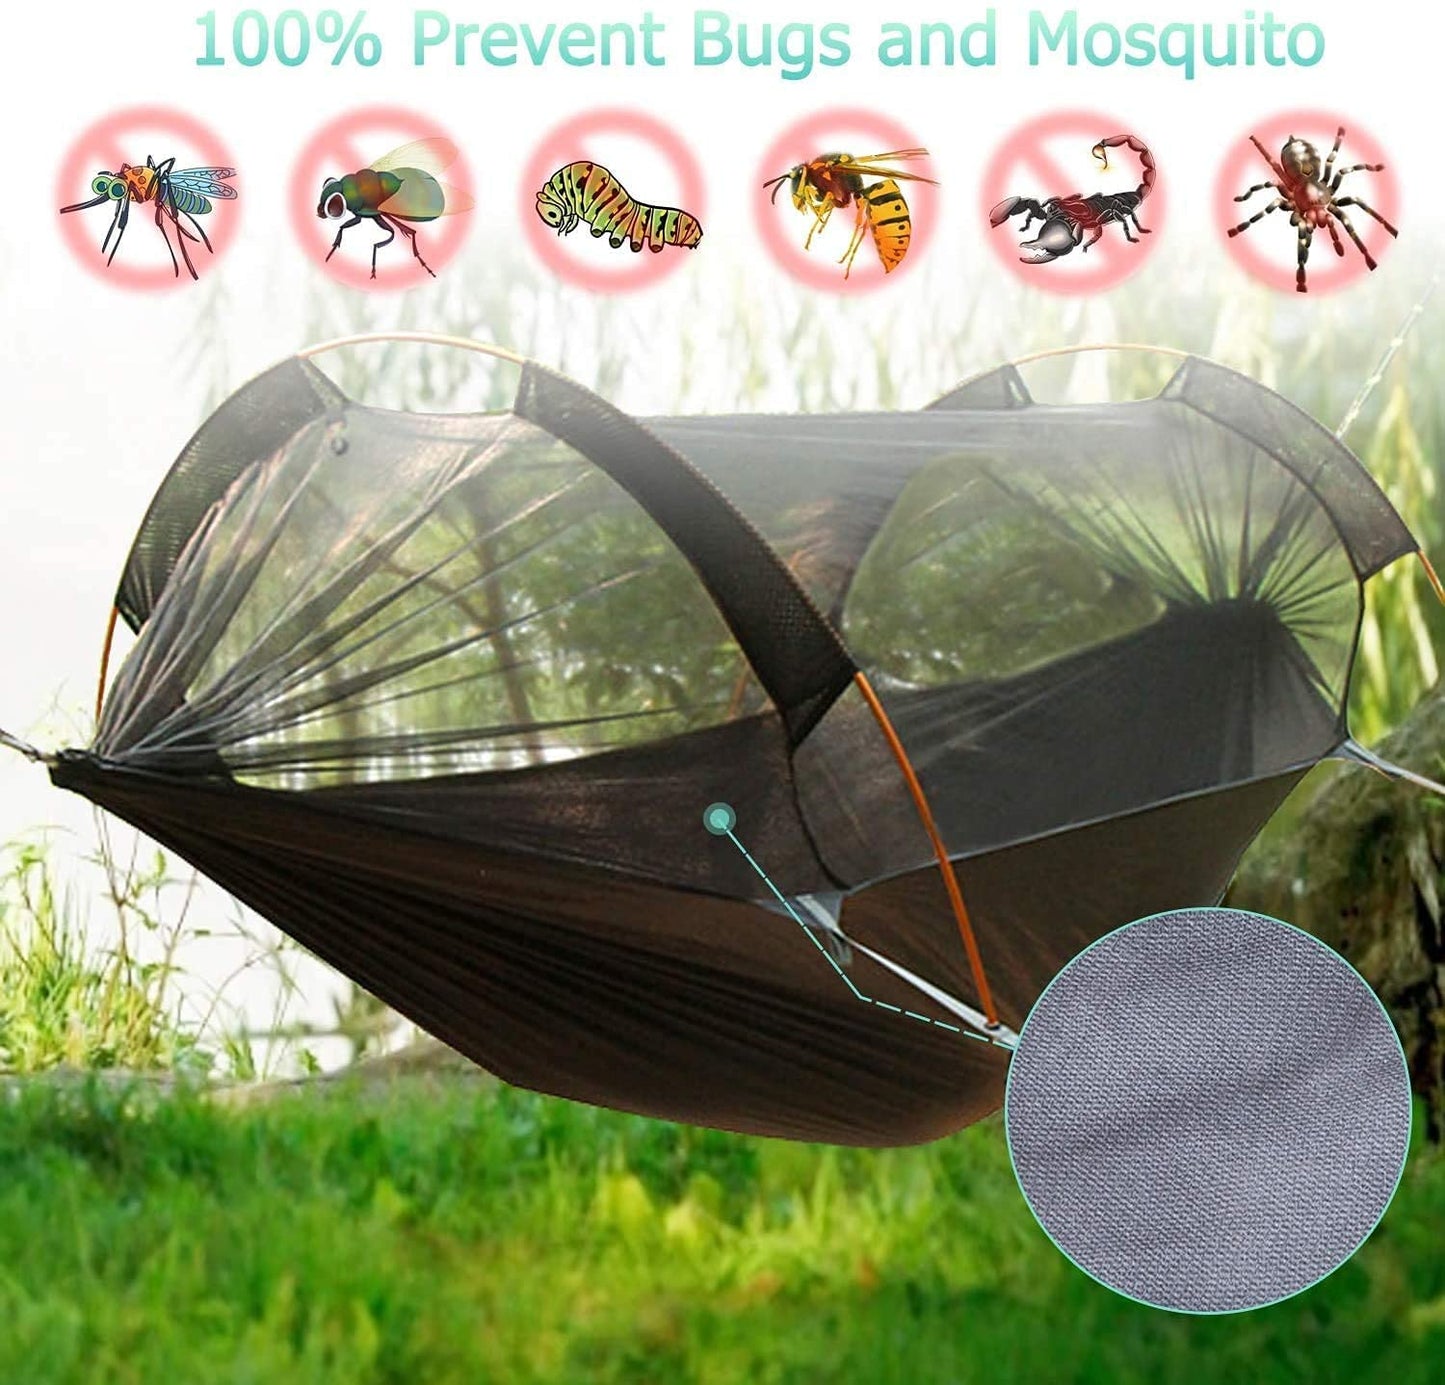 Camping Hammock Tent with Mosquito Net and Rainfly Cover (Green)